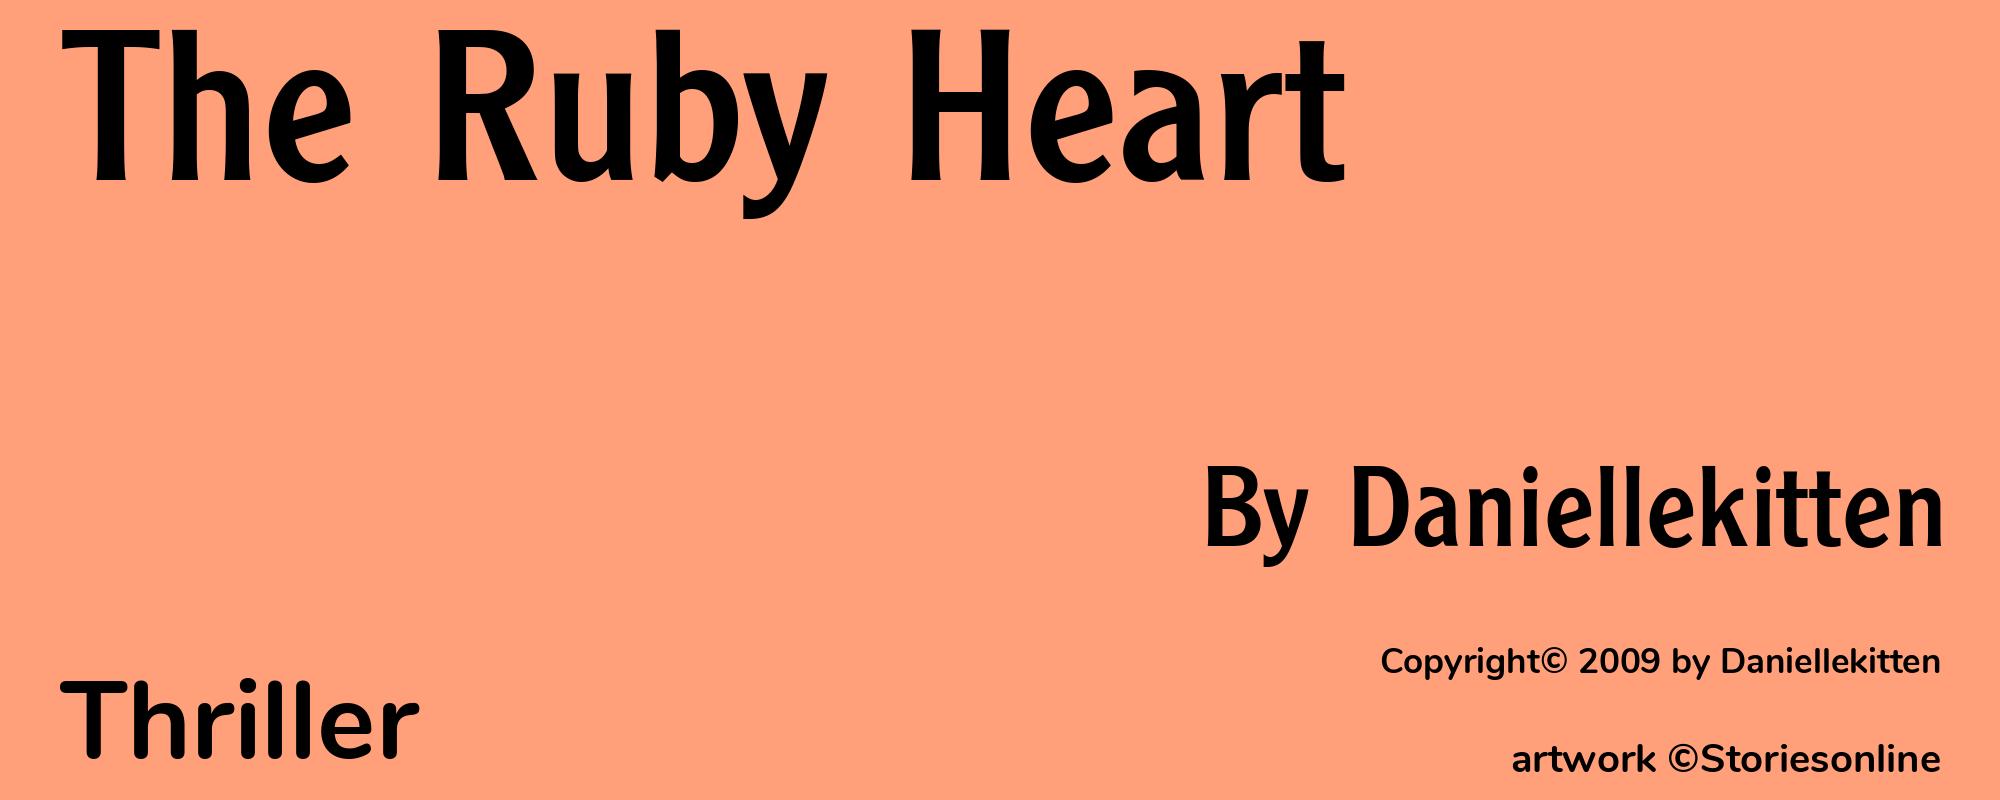 The Ruby Heart - Cover